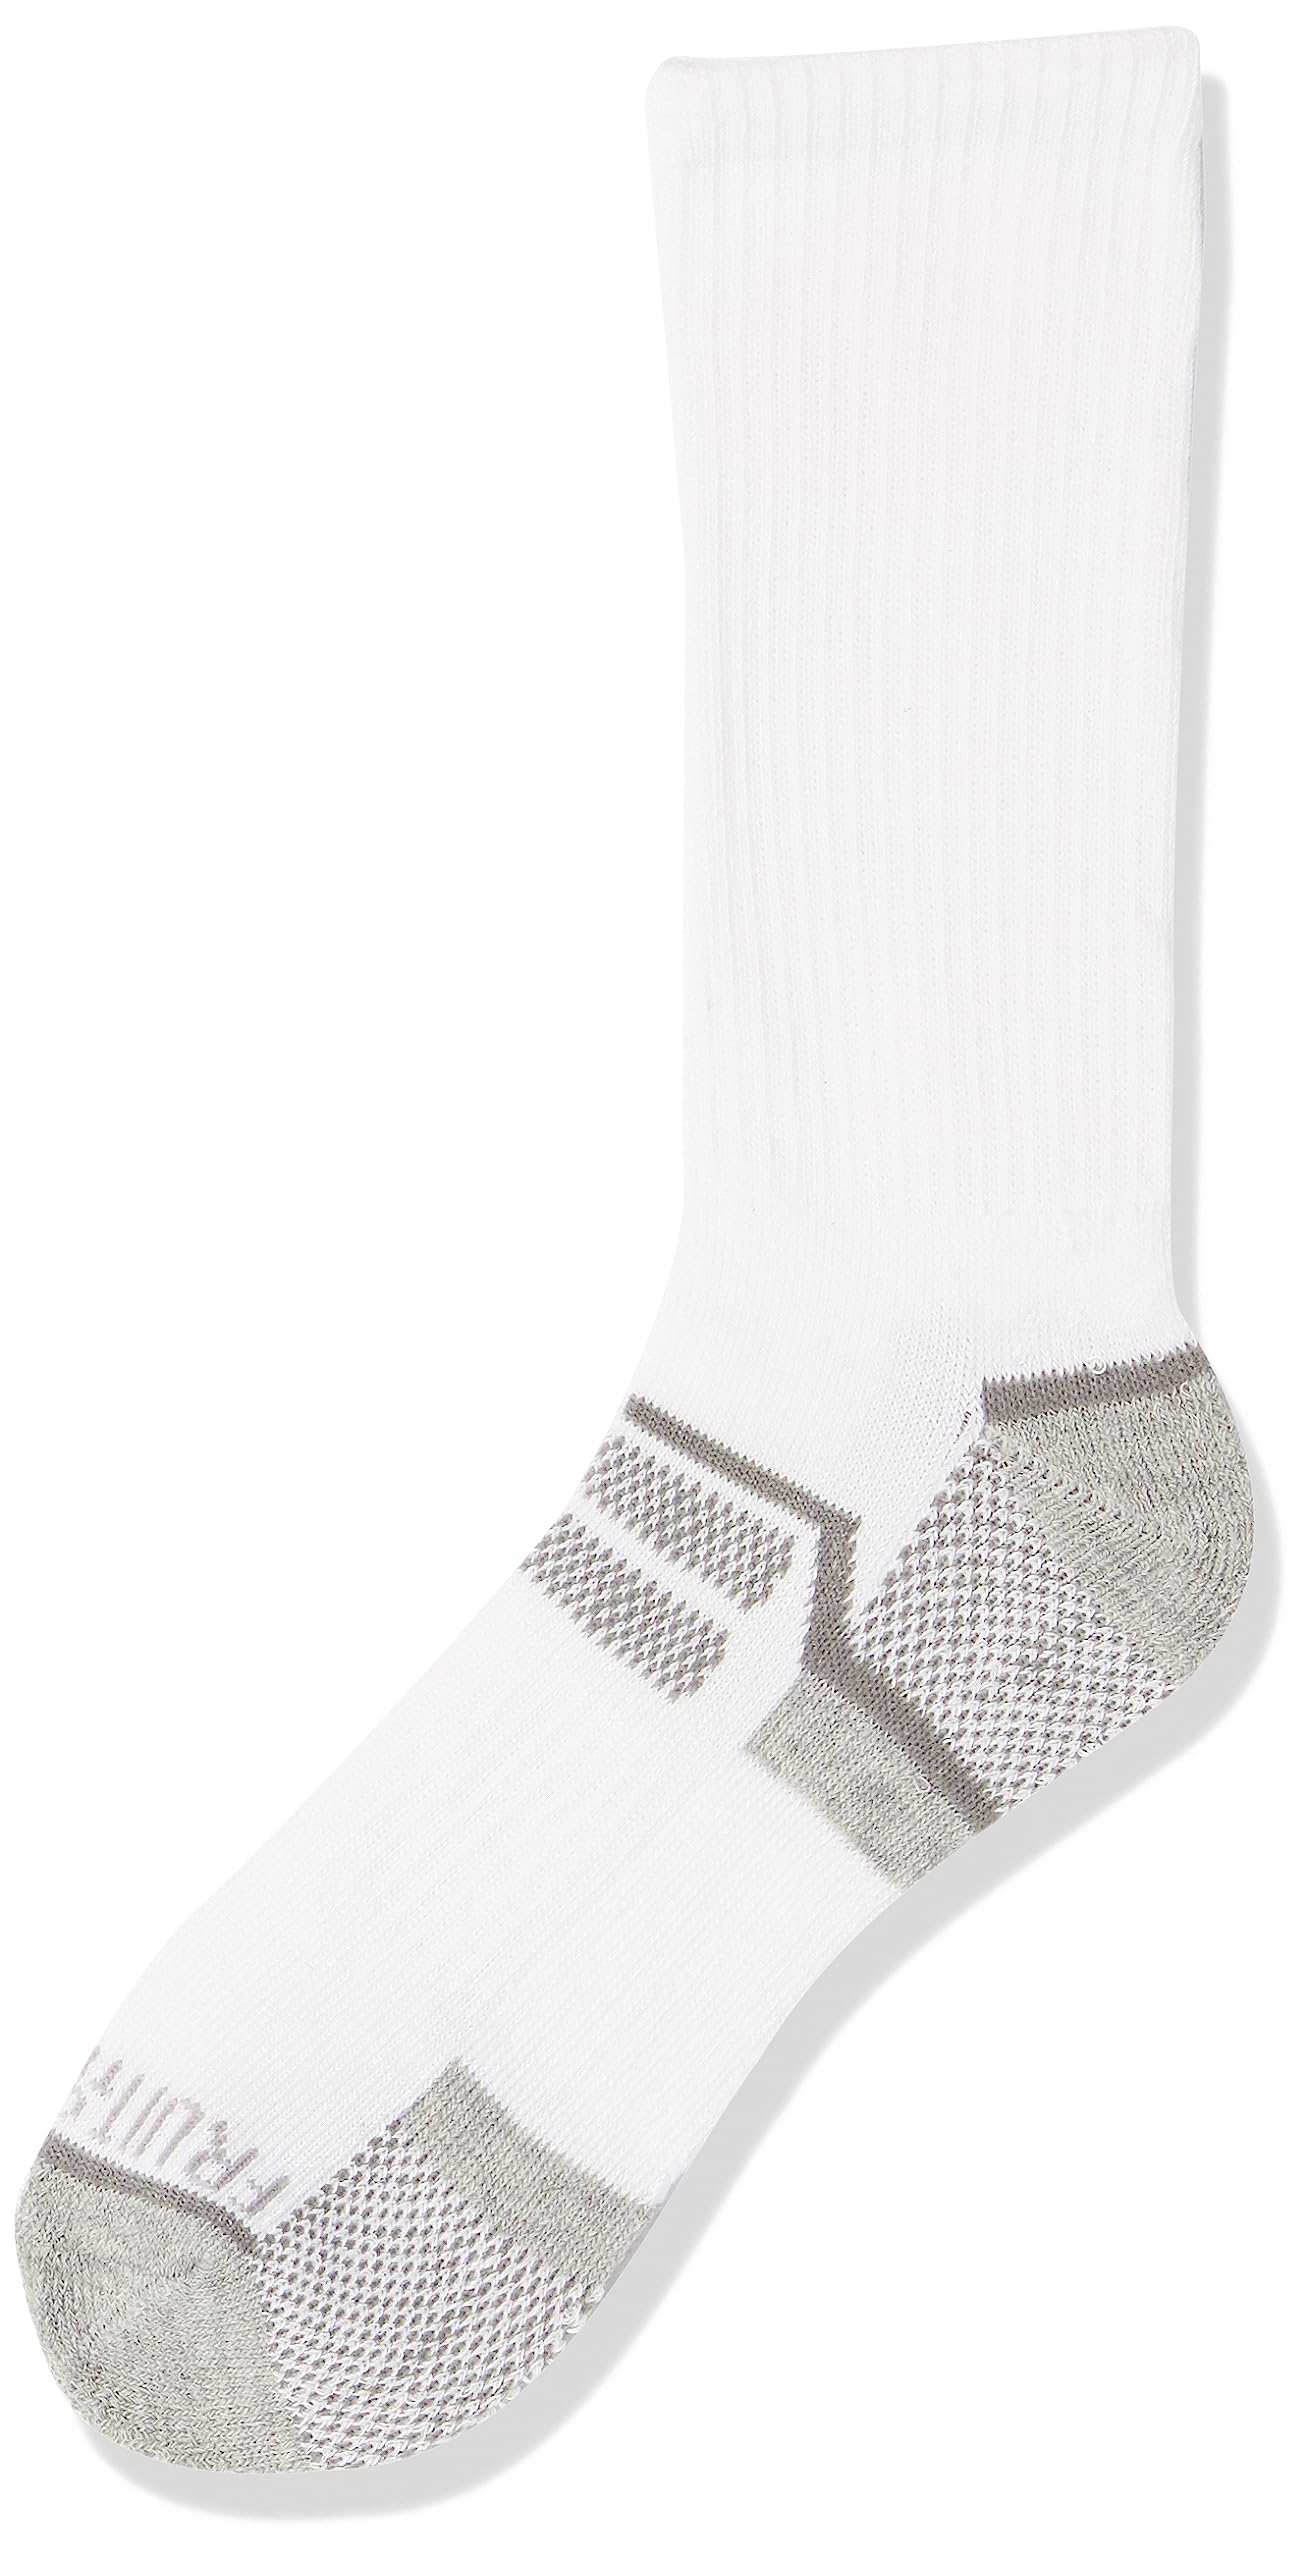 Fruit of the Loom Boys' Everyday Active Crew Socks (12 Pack)